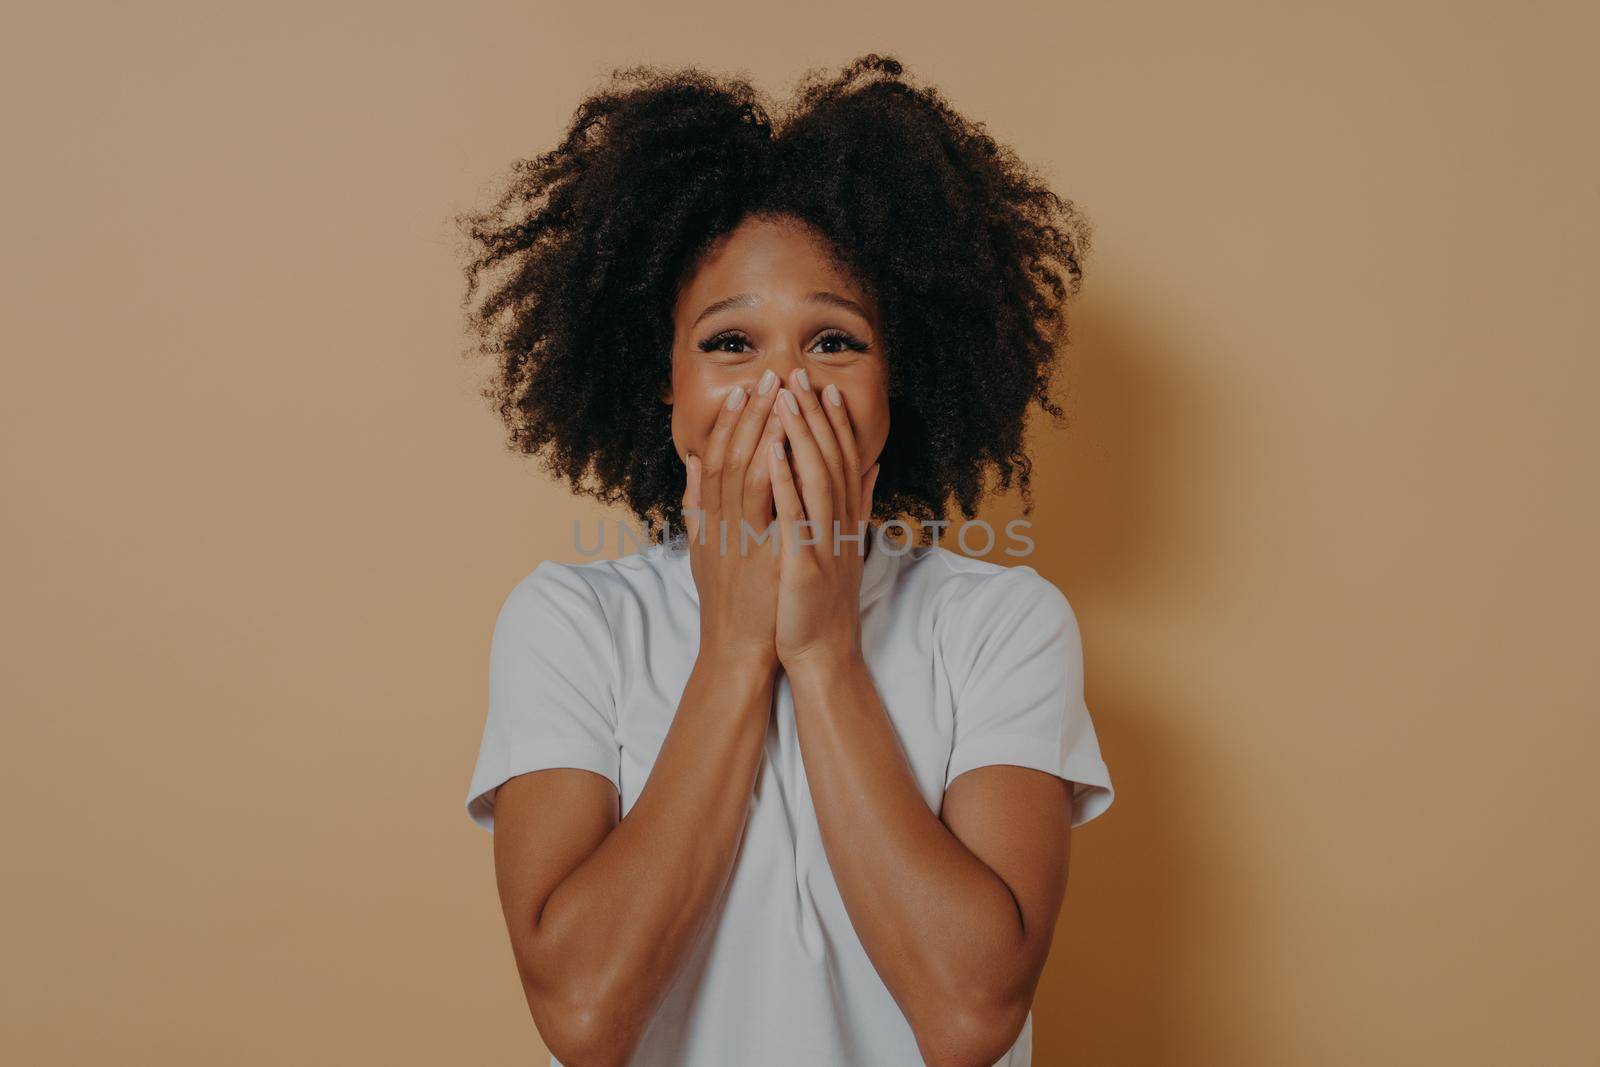 Surprised excited dark skinned woman in white tshirt covering her mouth with hands by vkstock